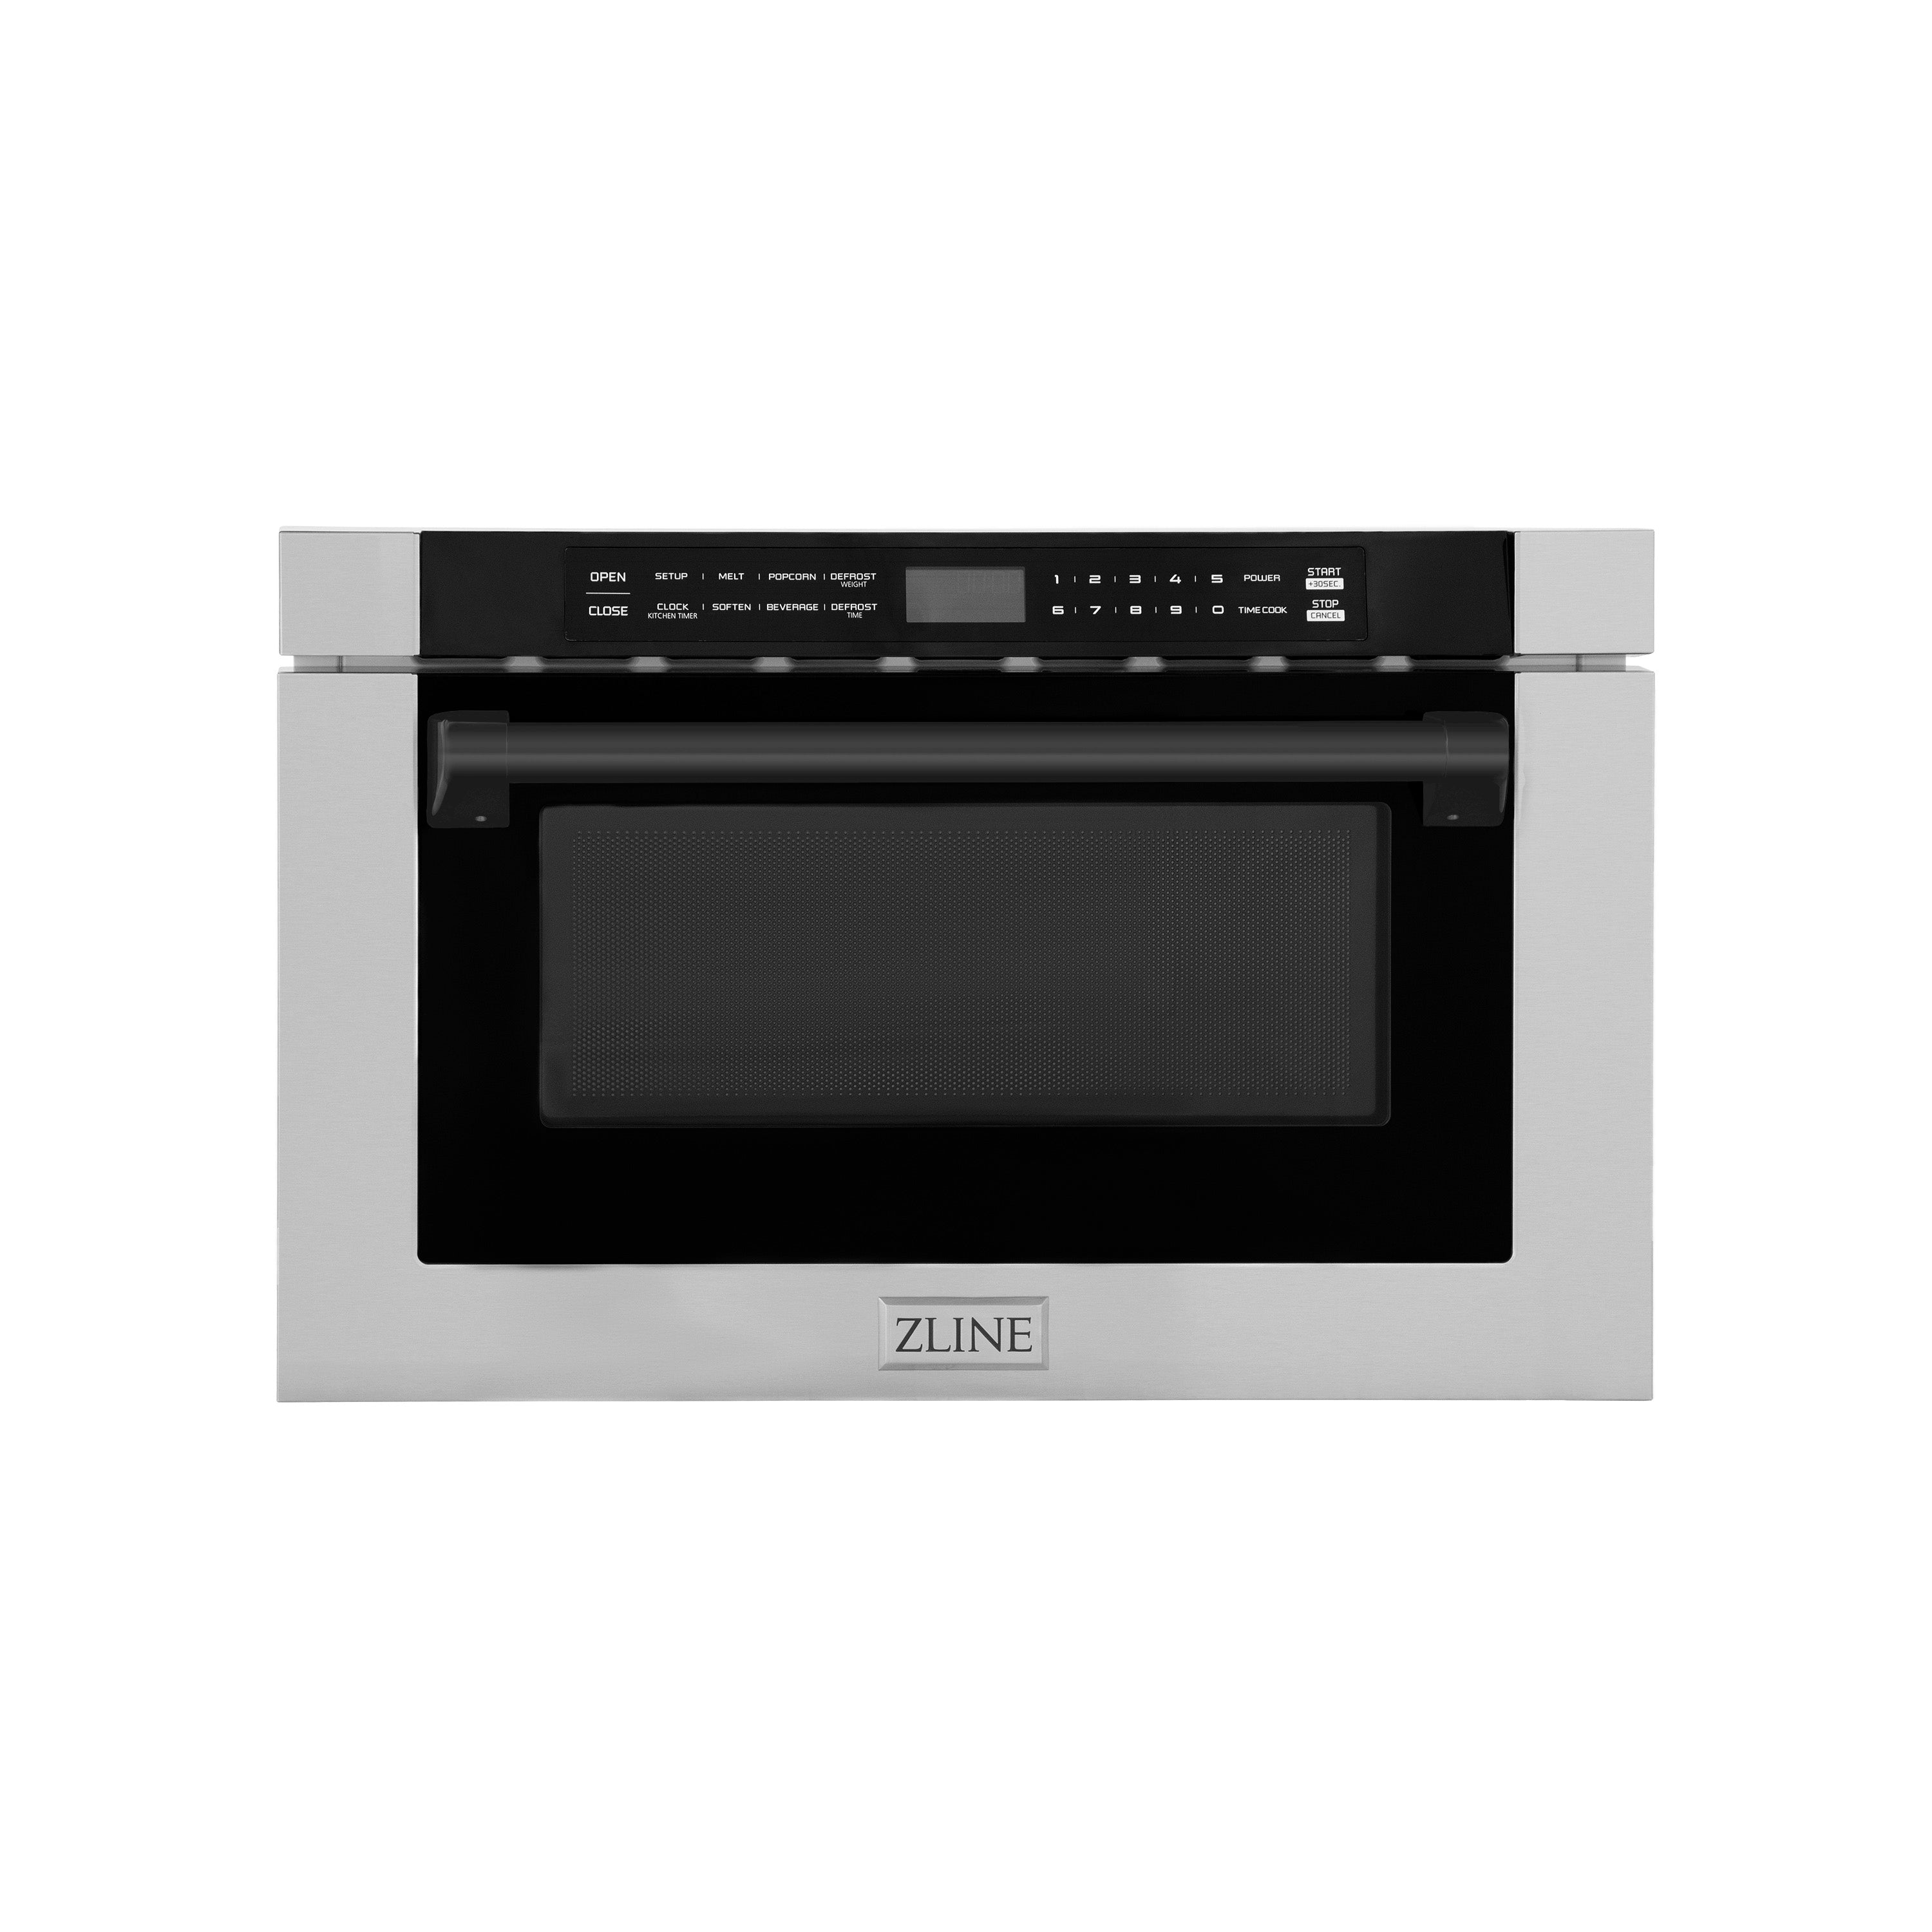 ZLINE Autograph Edition 24" 1.2 cu. ft. Built-in Microwave Drawer with a Traditional Handle in Stainless Steel and Matte Black Accents (MWDZ-1-H-MB) - New Star Living